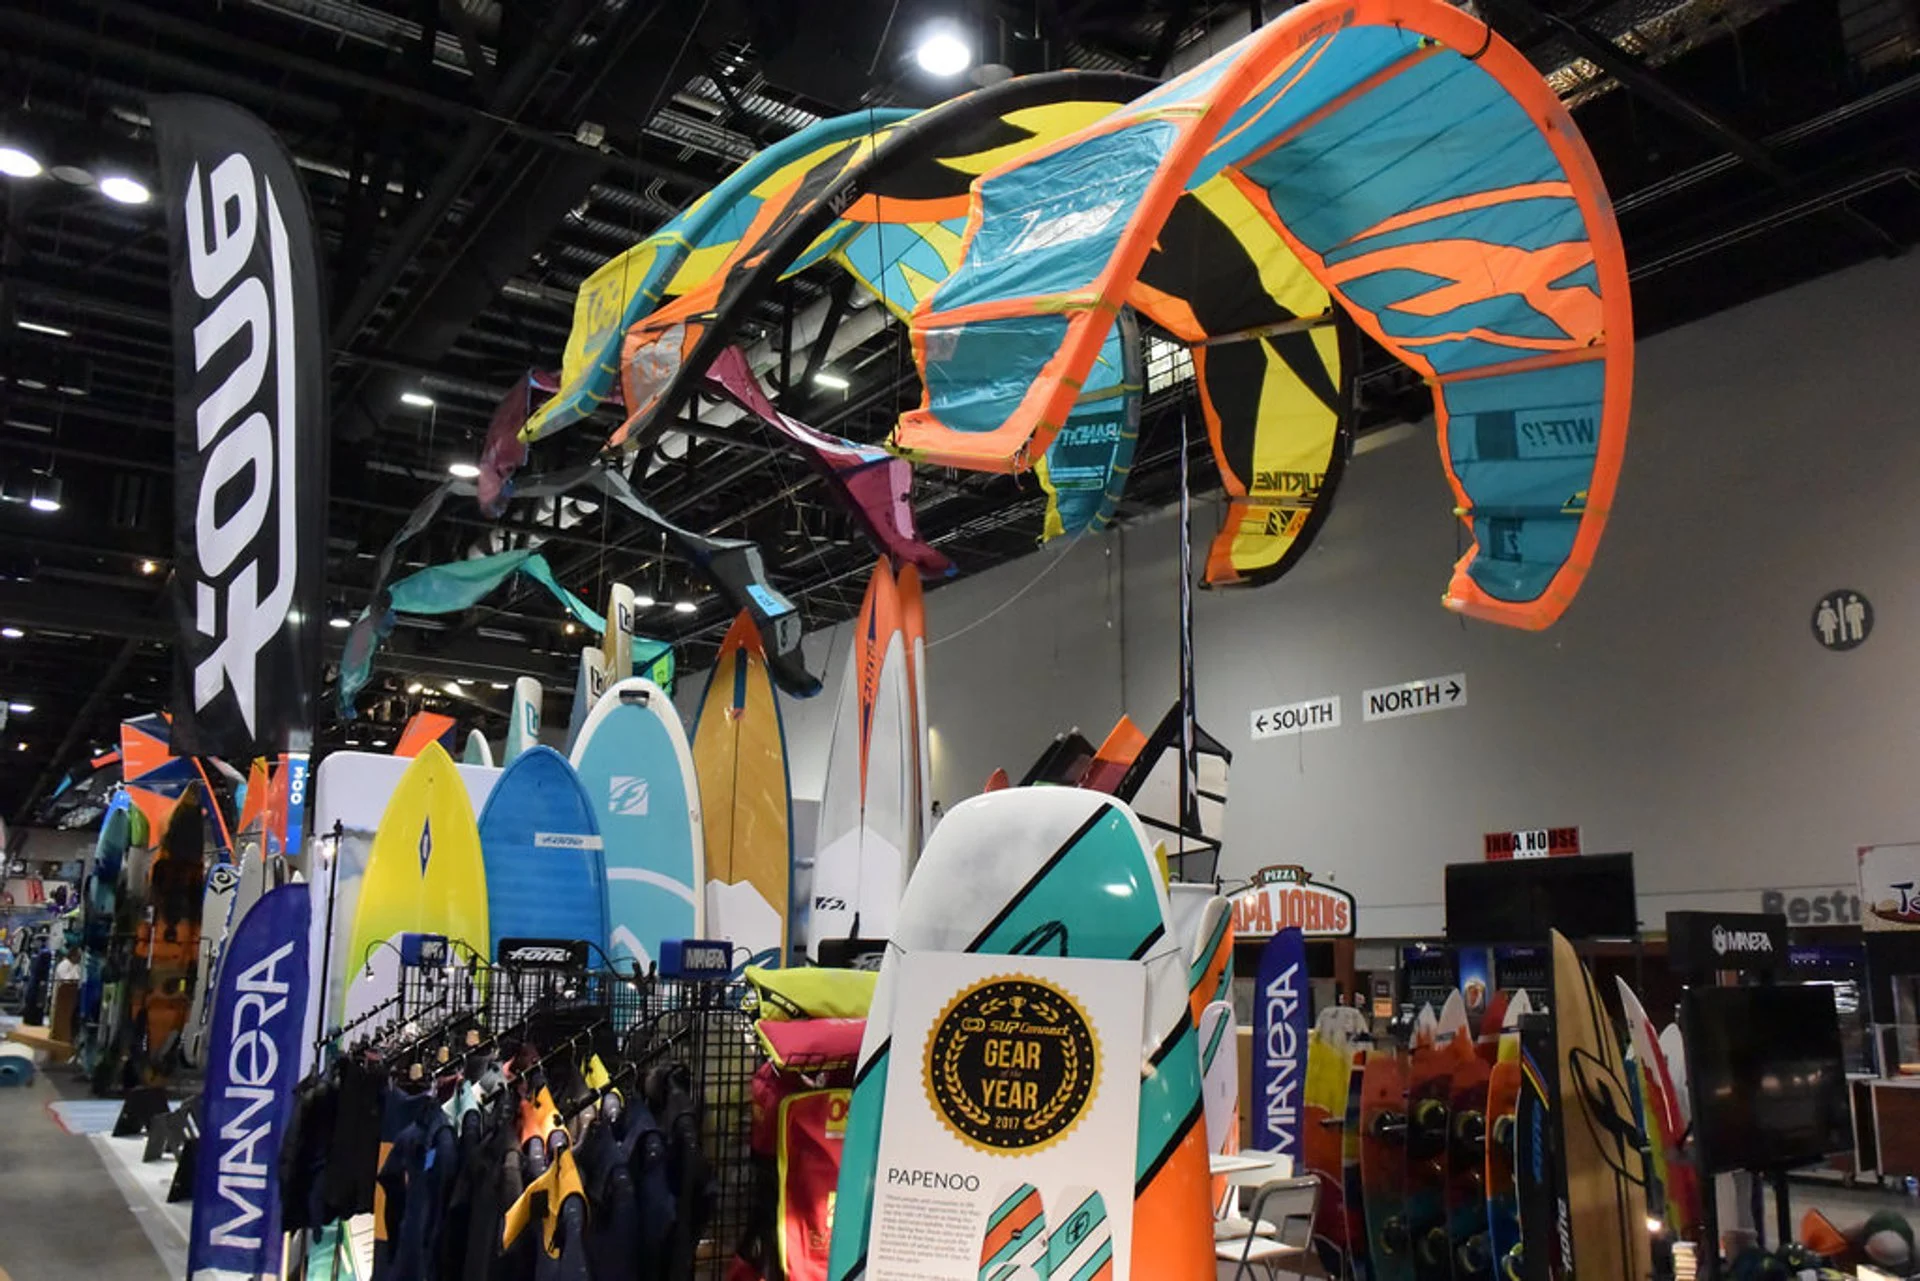 PREVIEW: SURF EXPO, ORLANDO, JANUARY 2023